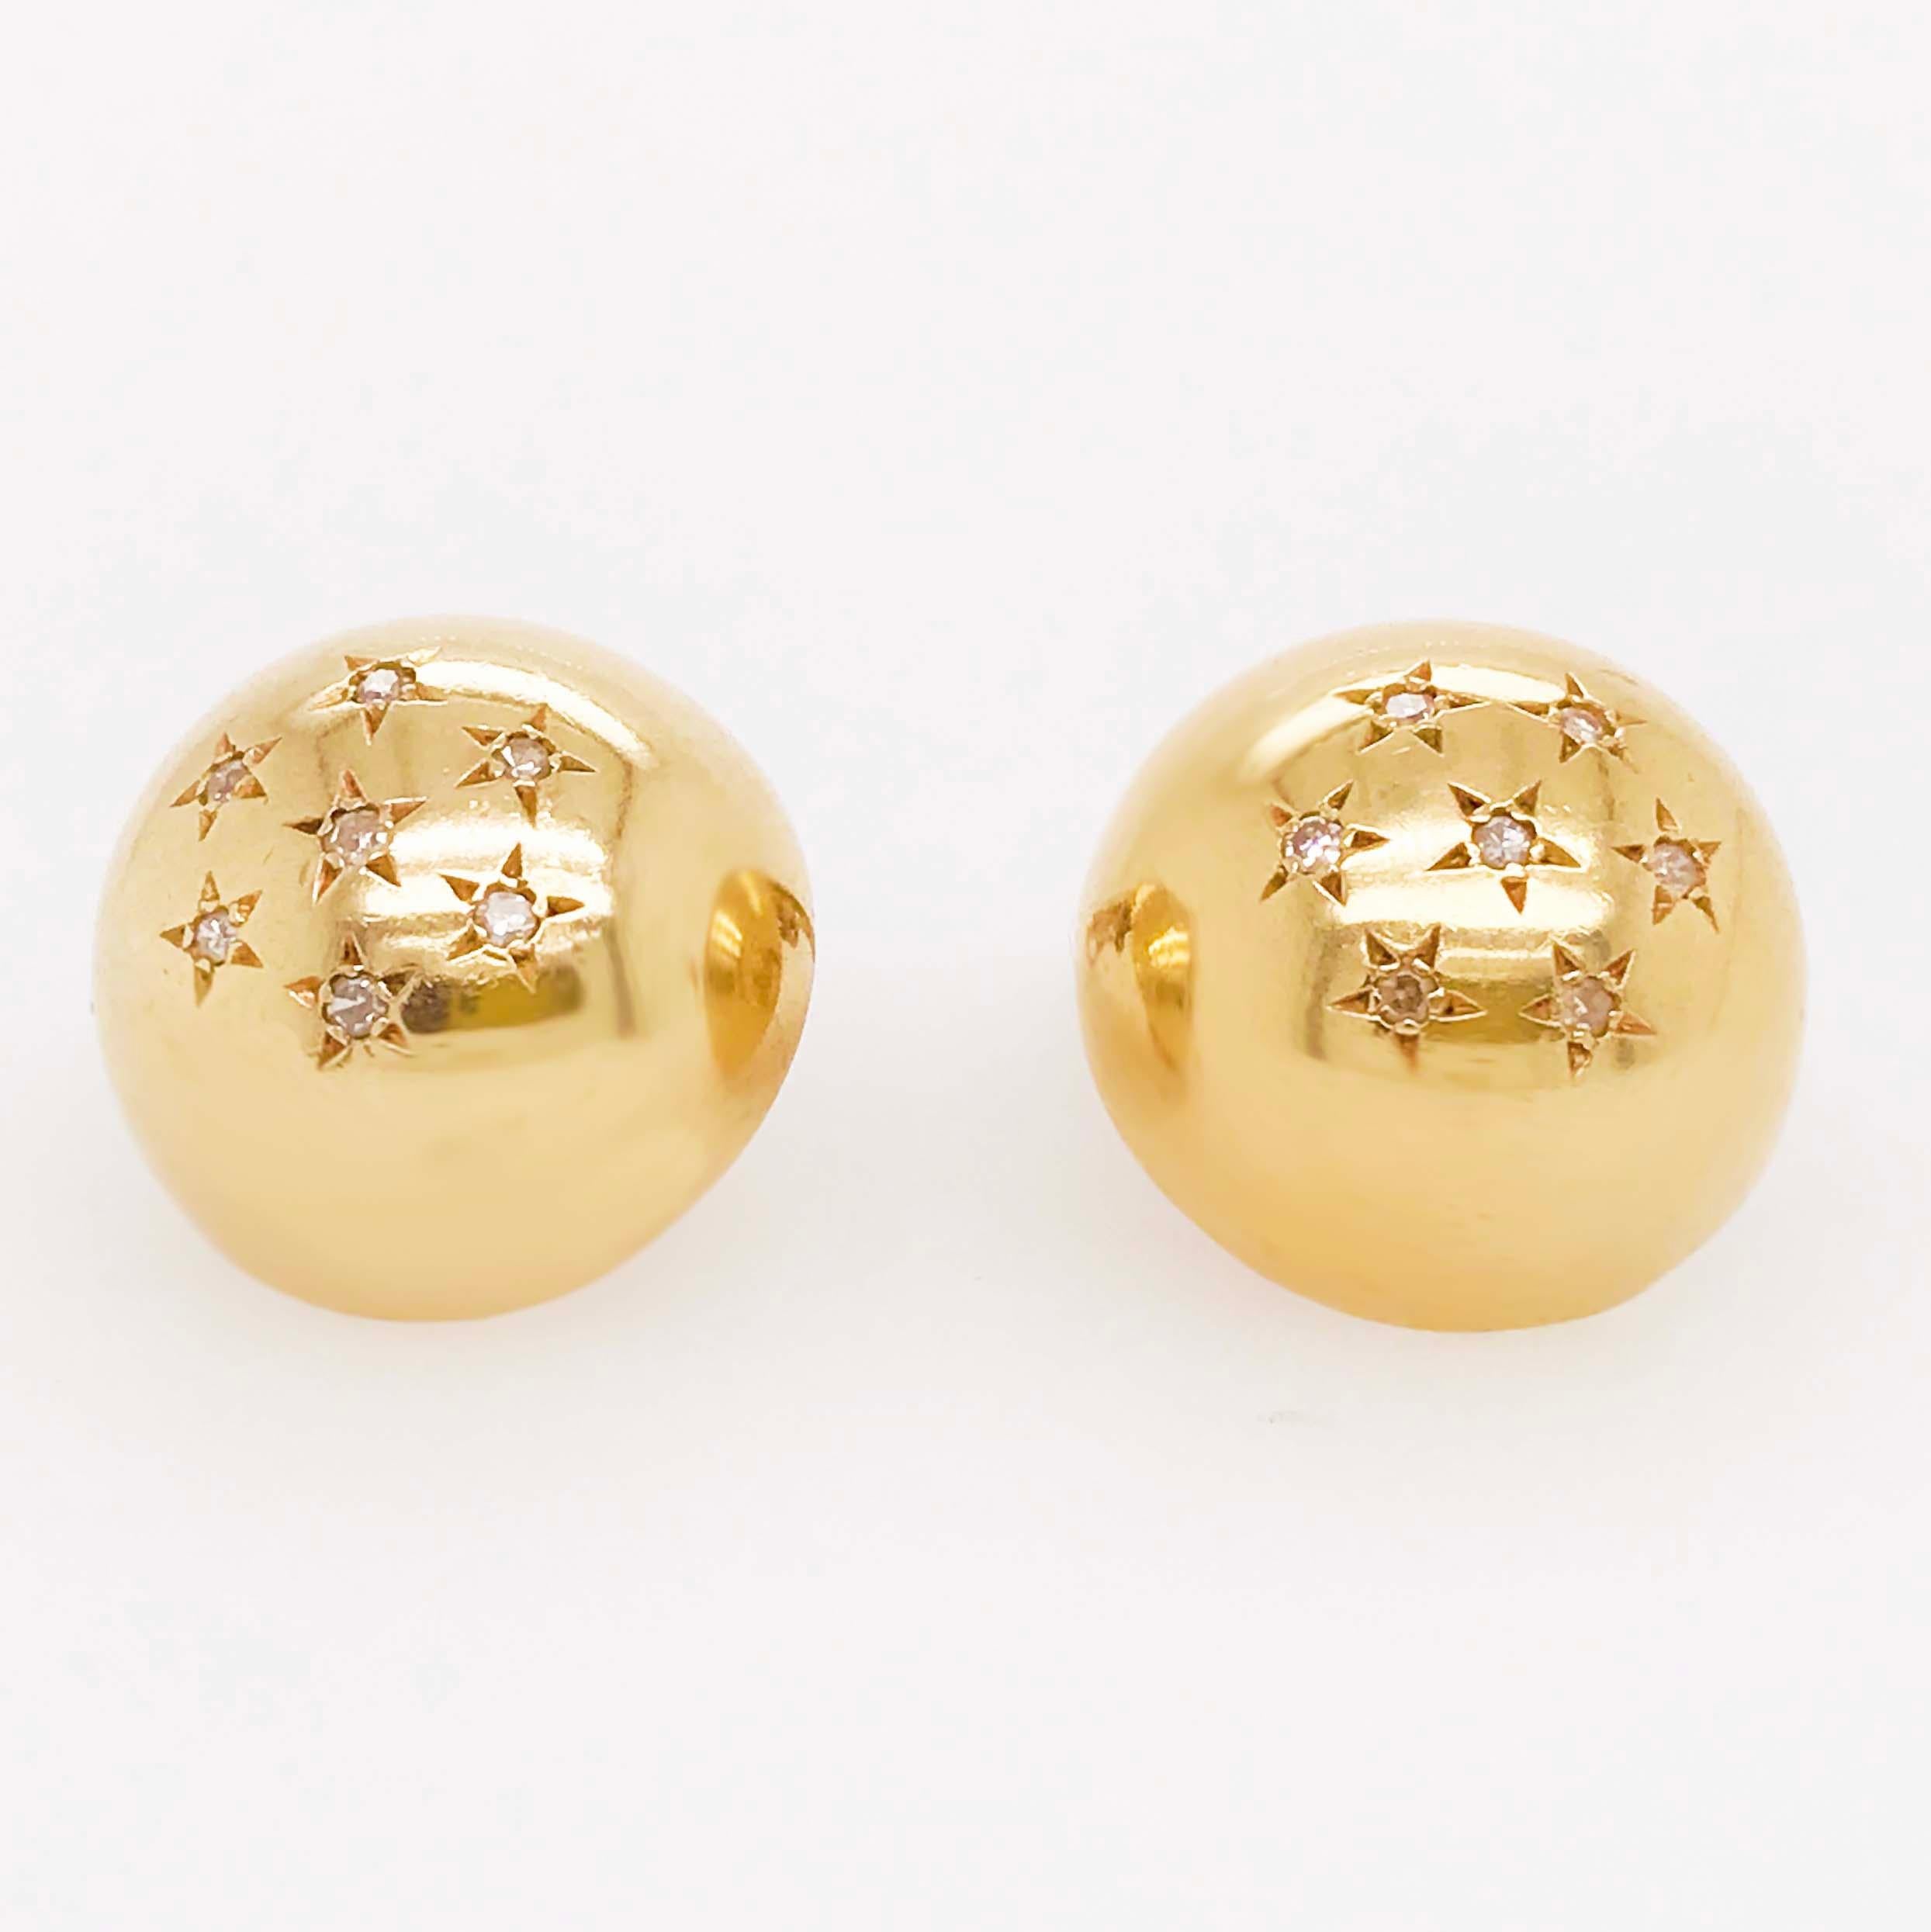 The adorable Circa 1950 diamond star clip on earrings are so cute! The 14 karat yellow gold diamond clip on earrings have a large gold ball on the front. The gold ball is dusted with round brilliant diamonds that are set in custom star settings!